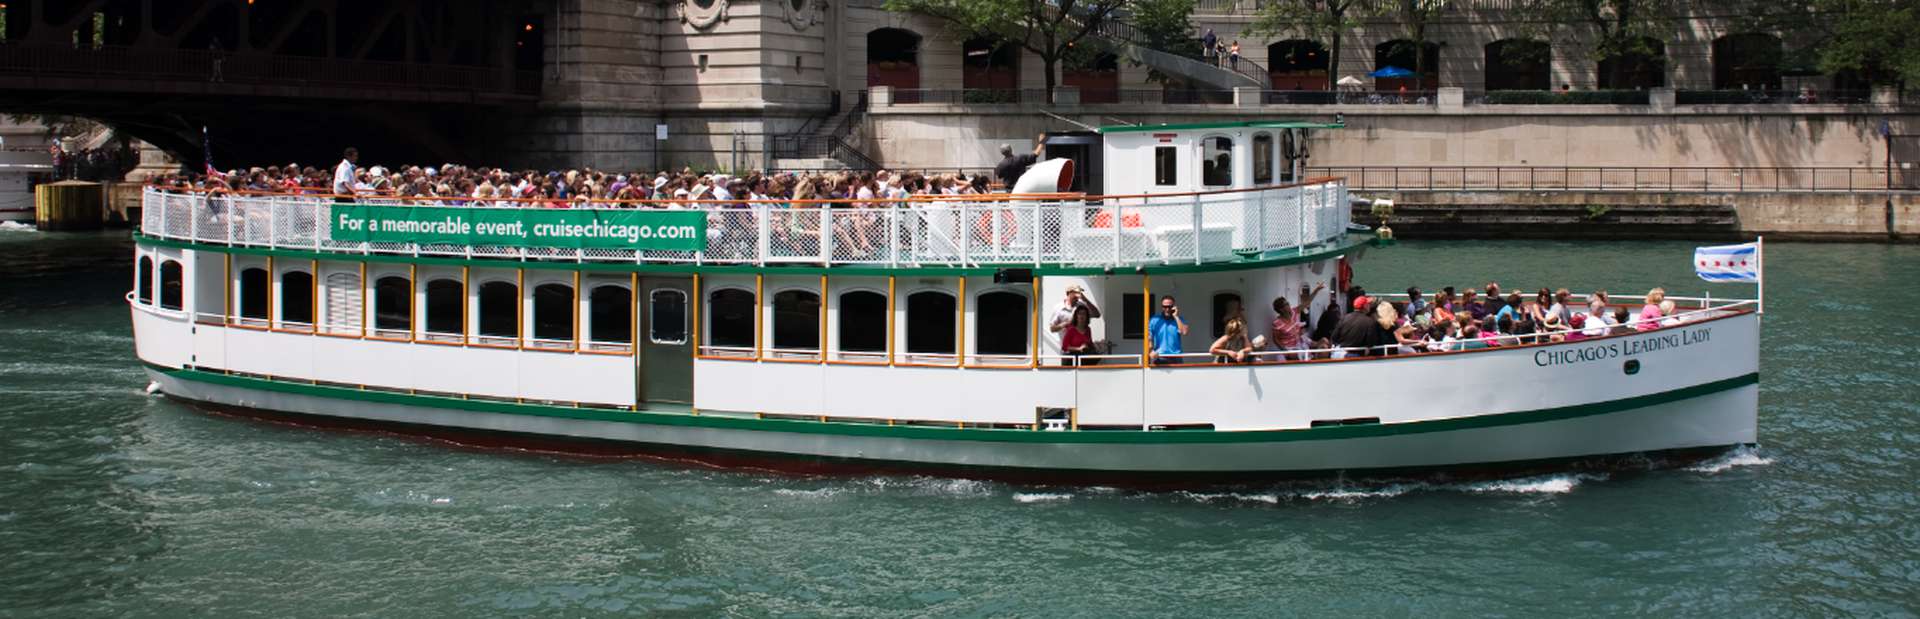 CHICAGO'S LEADING LADY Commercial Vessel - Burger Boat Company